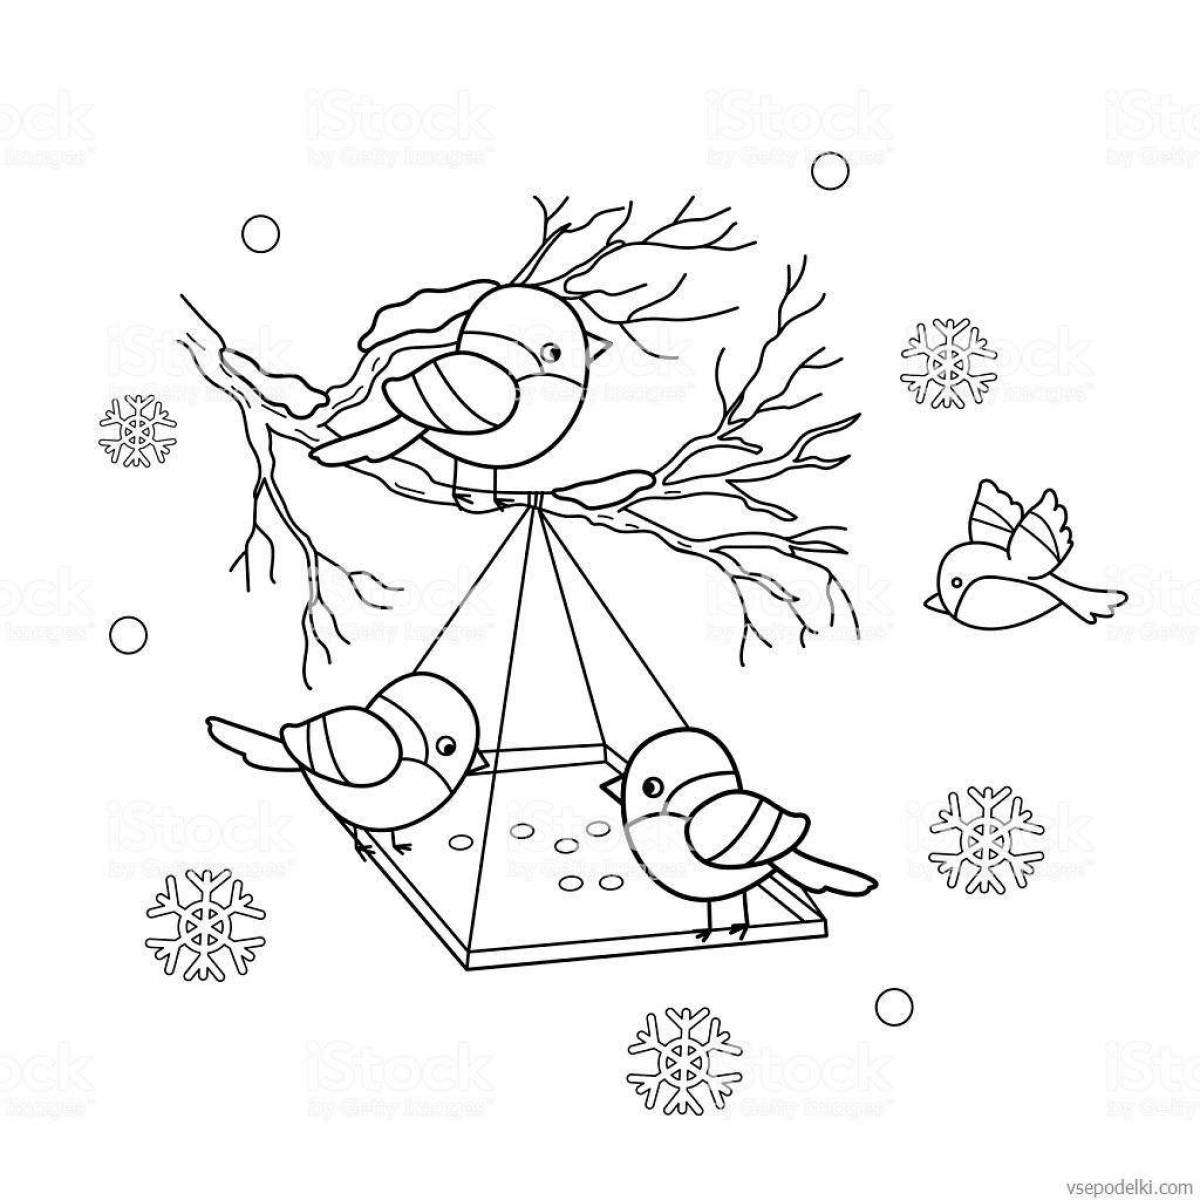 Feed the birds playful coloring page